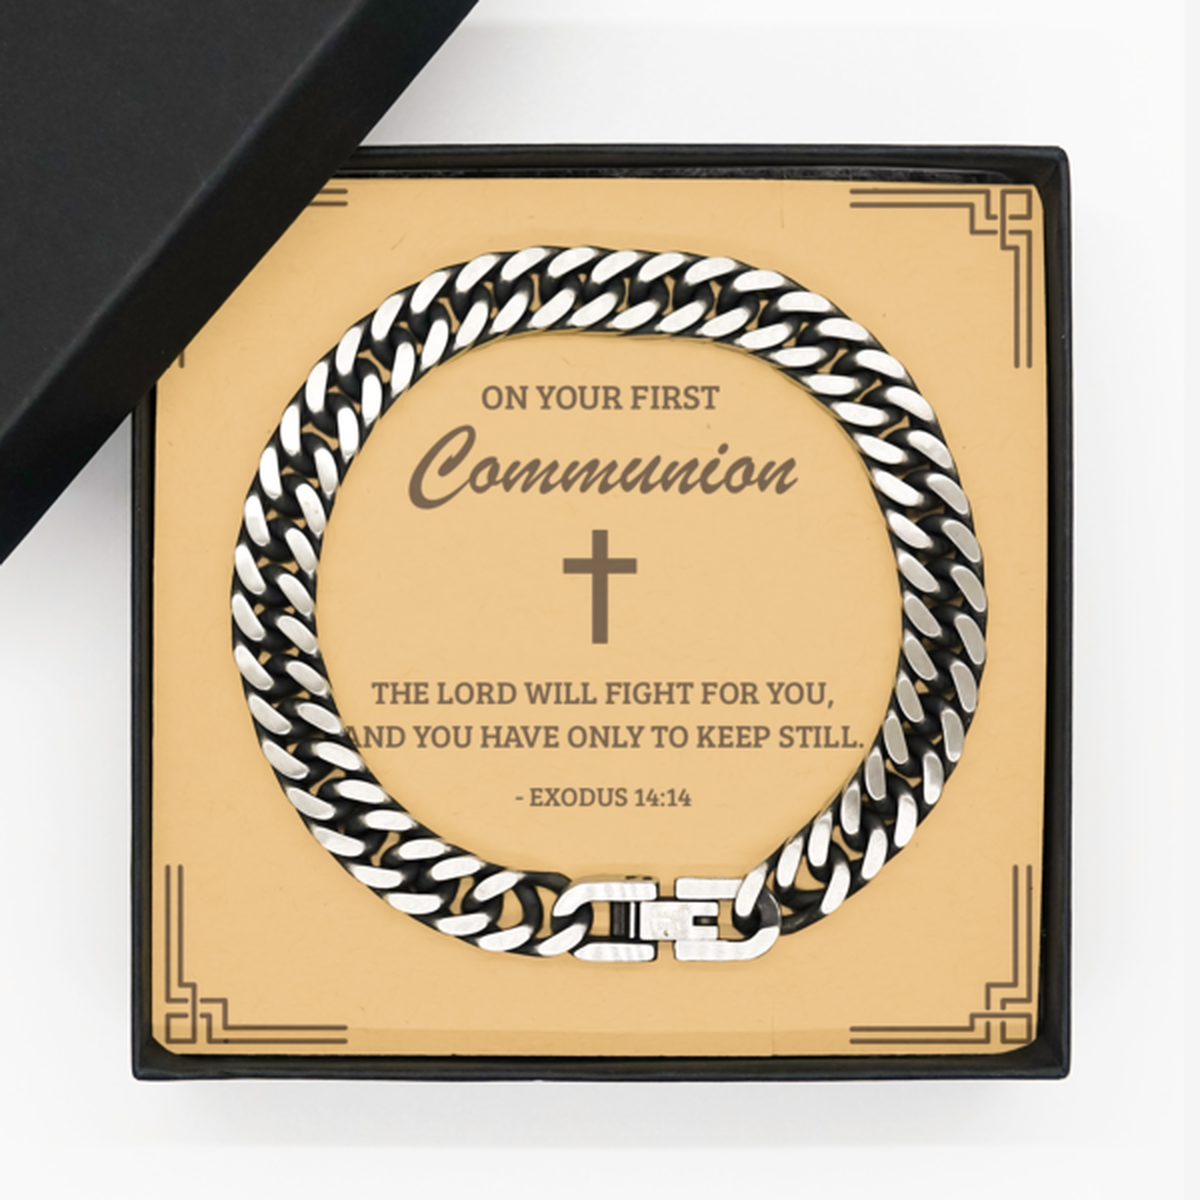 First Communion Gifts for Teenage Boys, The Lord will fight for you, Cuban Link Chain Bracelet with Bible Verse Message Card, Religious Catholic Bracelet for Son, Grandson, Dad, Godfather